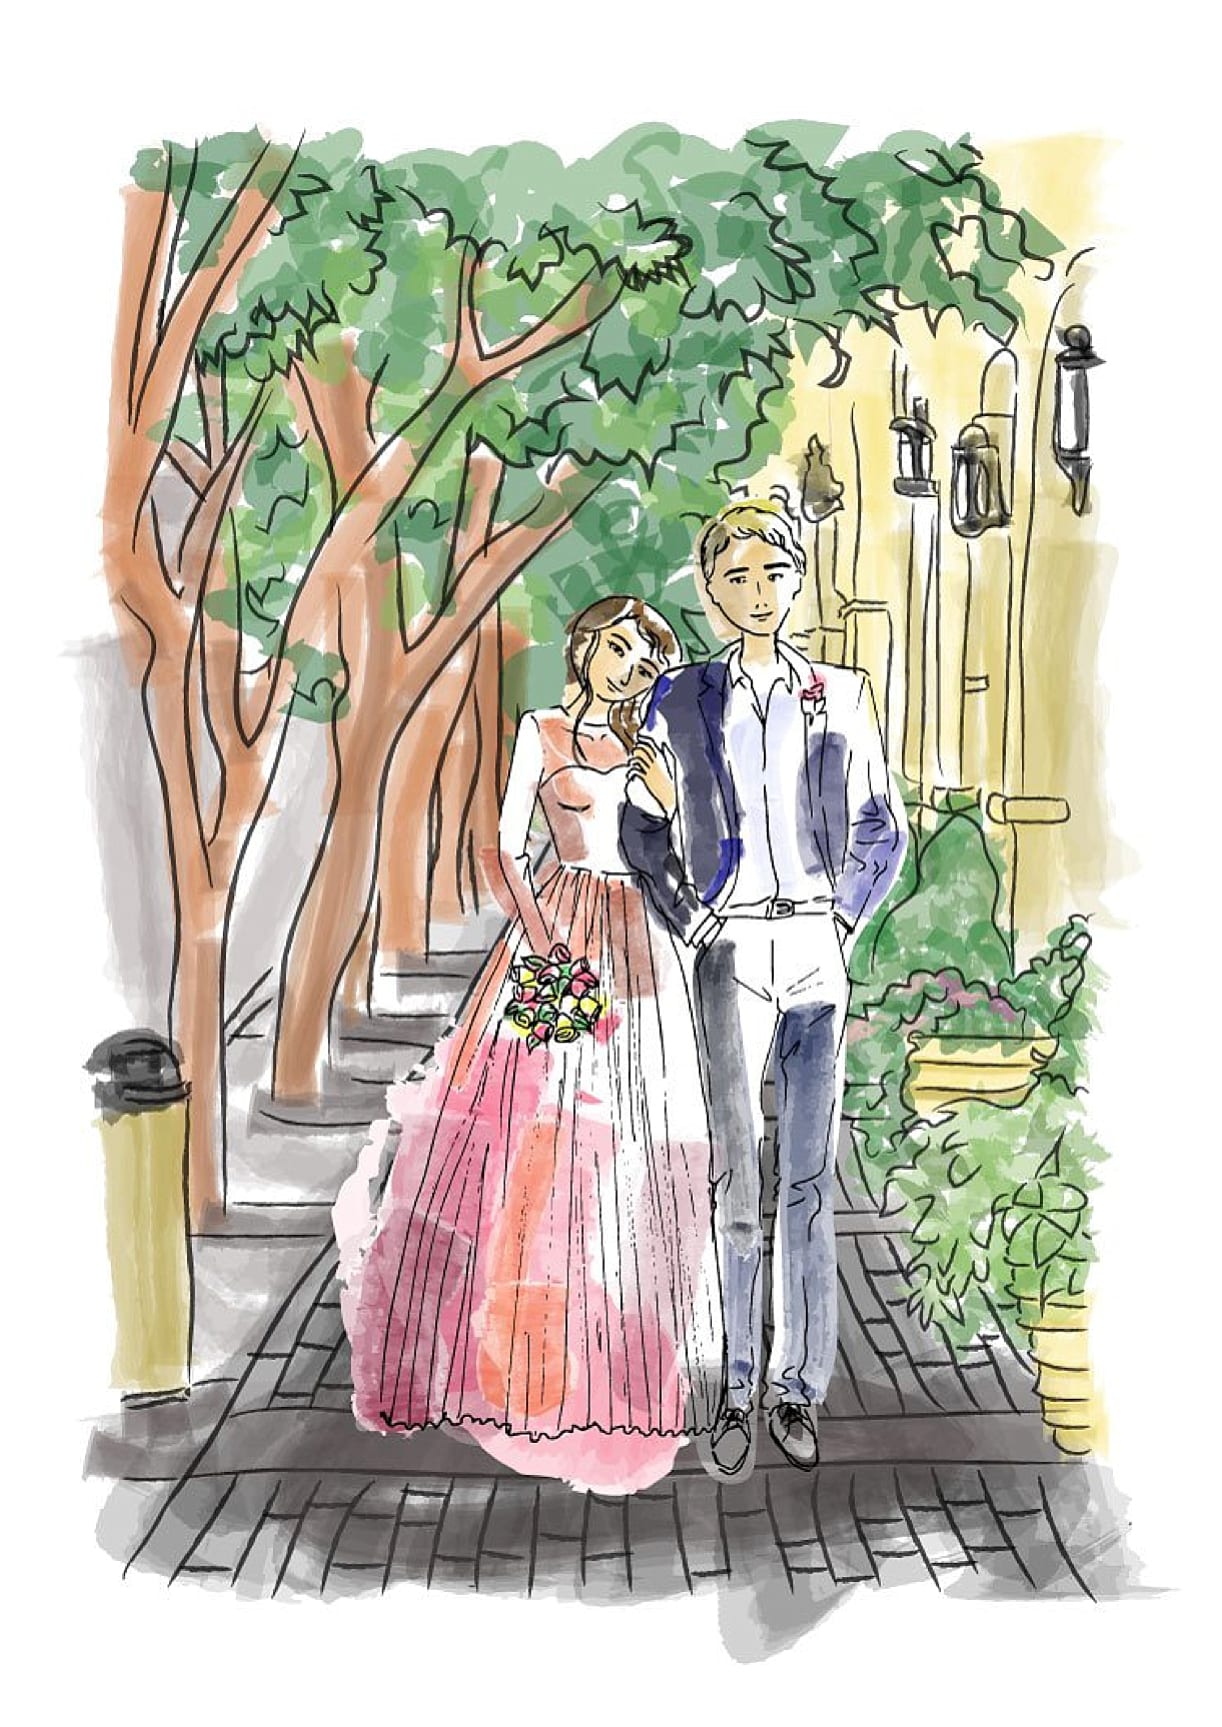 Personalized Gift Ideas for Newlyweds Couples | Hill City Bride Virginia Wedding Blog Watercolor Digital Print